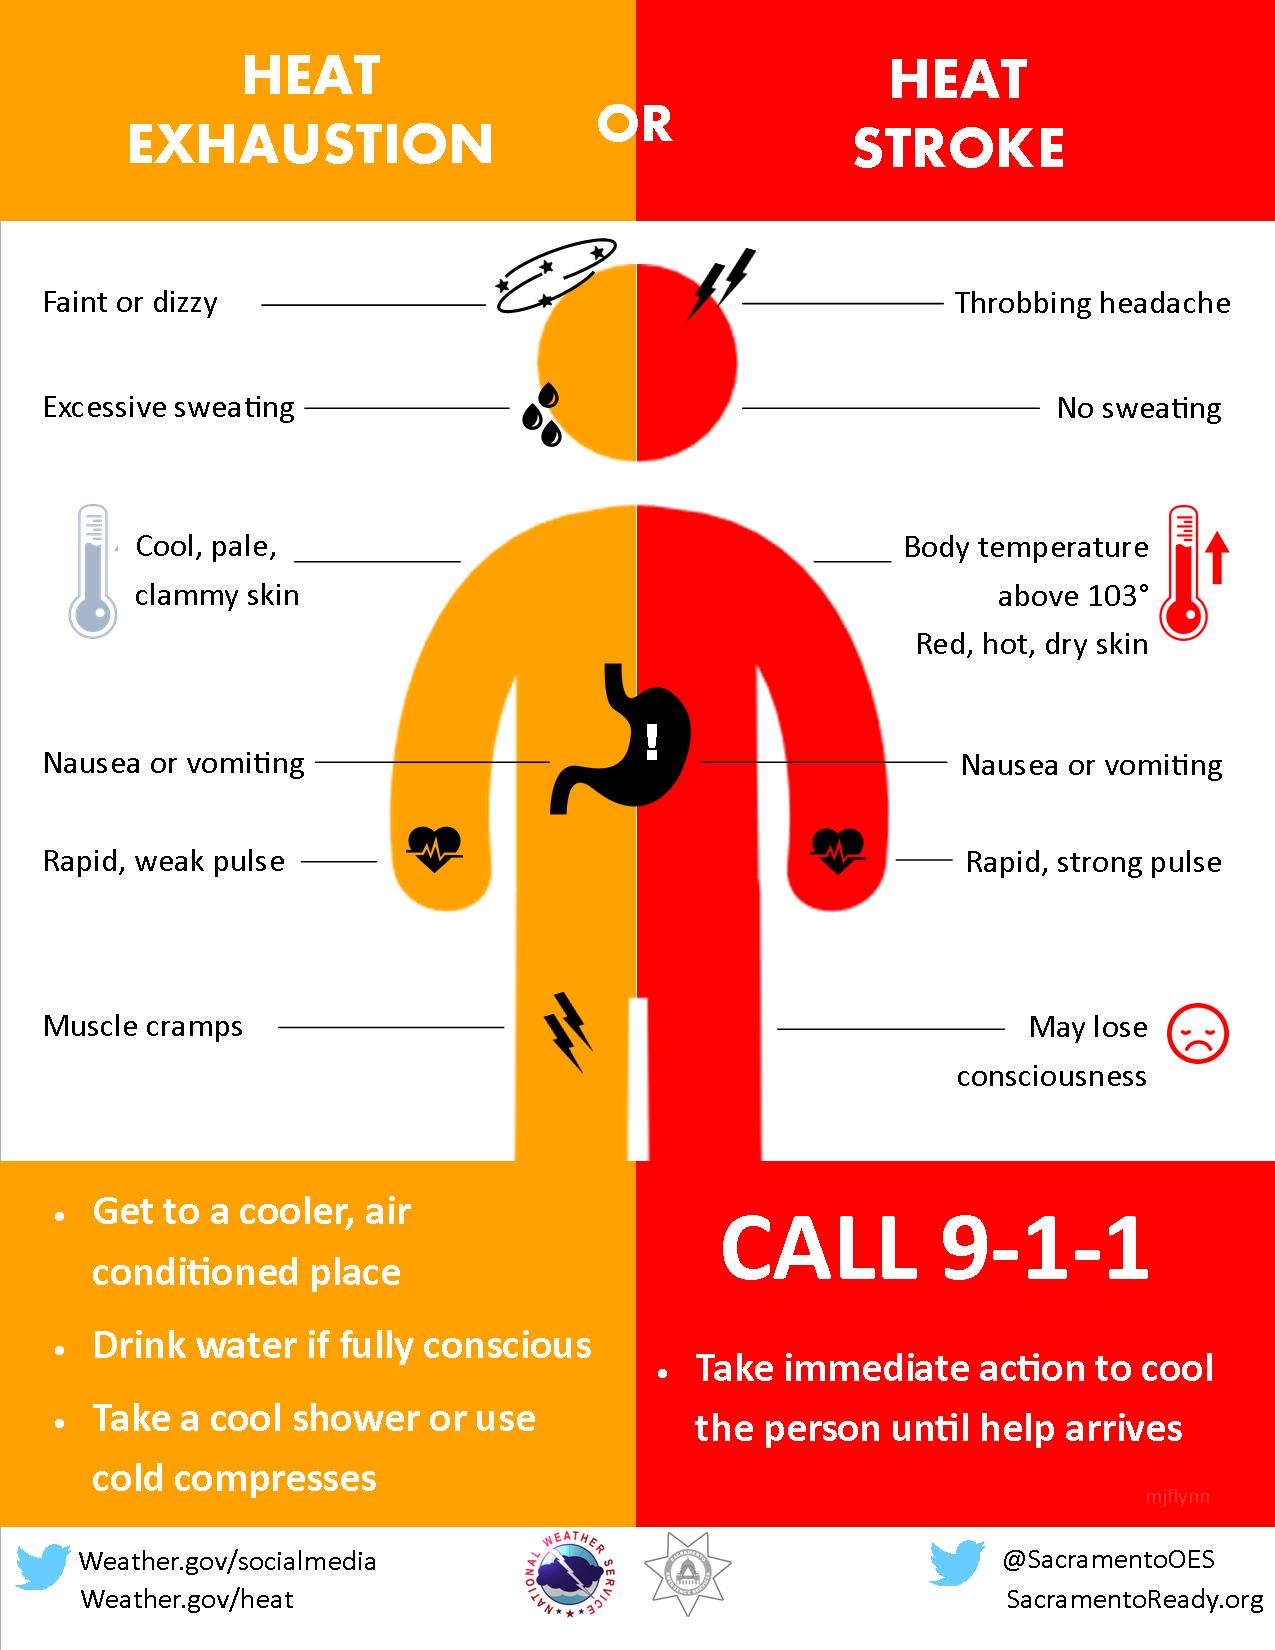 During extremely hot and humid weather, your body's ability to cool itself is challenged. When the body heats too rapidly to cool itself properly, or when too much fluid or salt is lost through dehydration or sweating, body temperature rises and you or someone you care about may experience a heat-related illness. It is important to know the symptoms of excessive heat exposure and the appropriate responses. The Centers for Disease Control and Prevention provides a list of warning signs and symptoms of heat